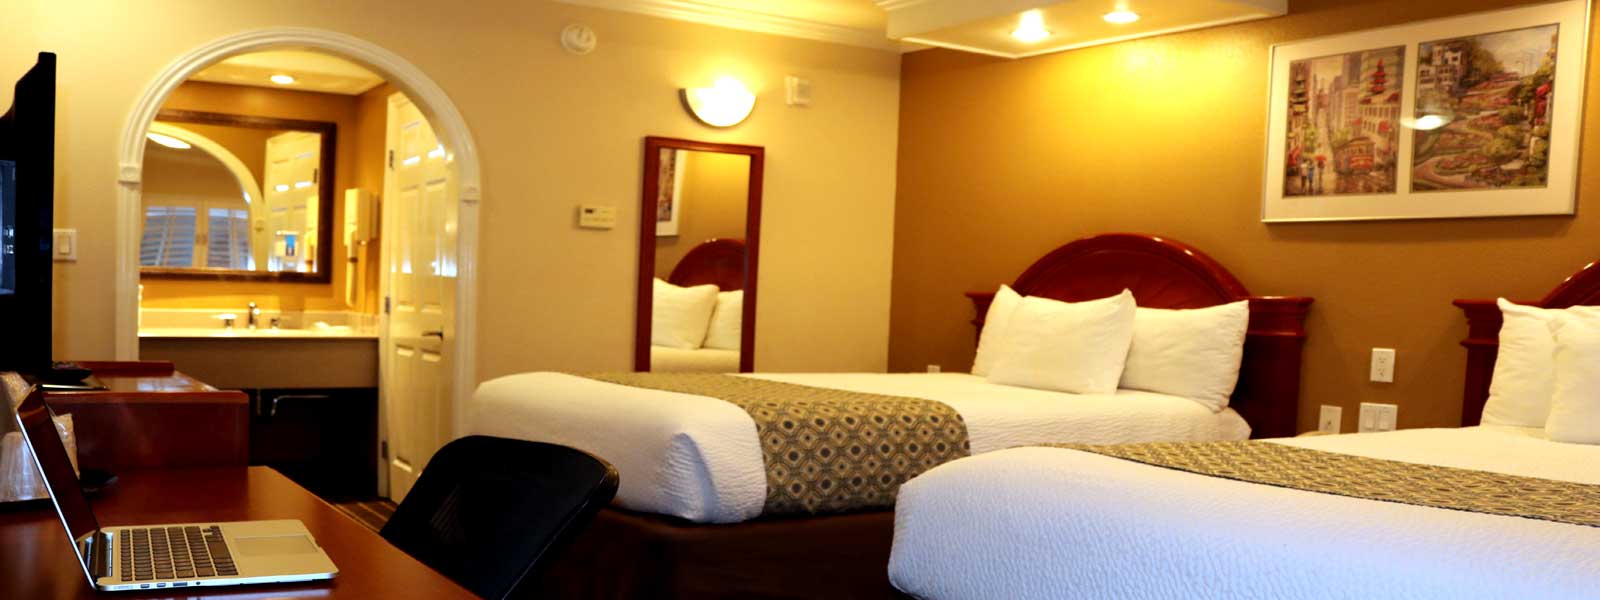 Motels in San Francisco Budget Discount 3 Star Rating 